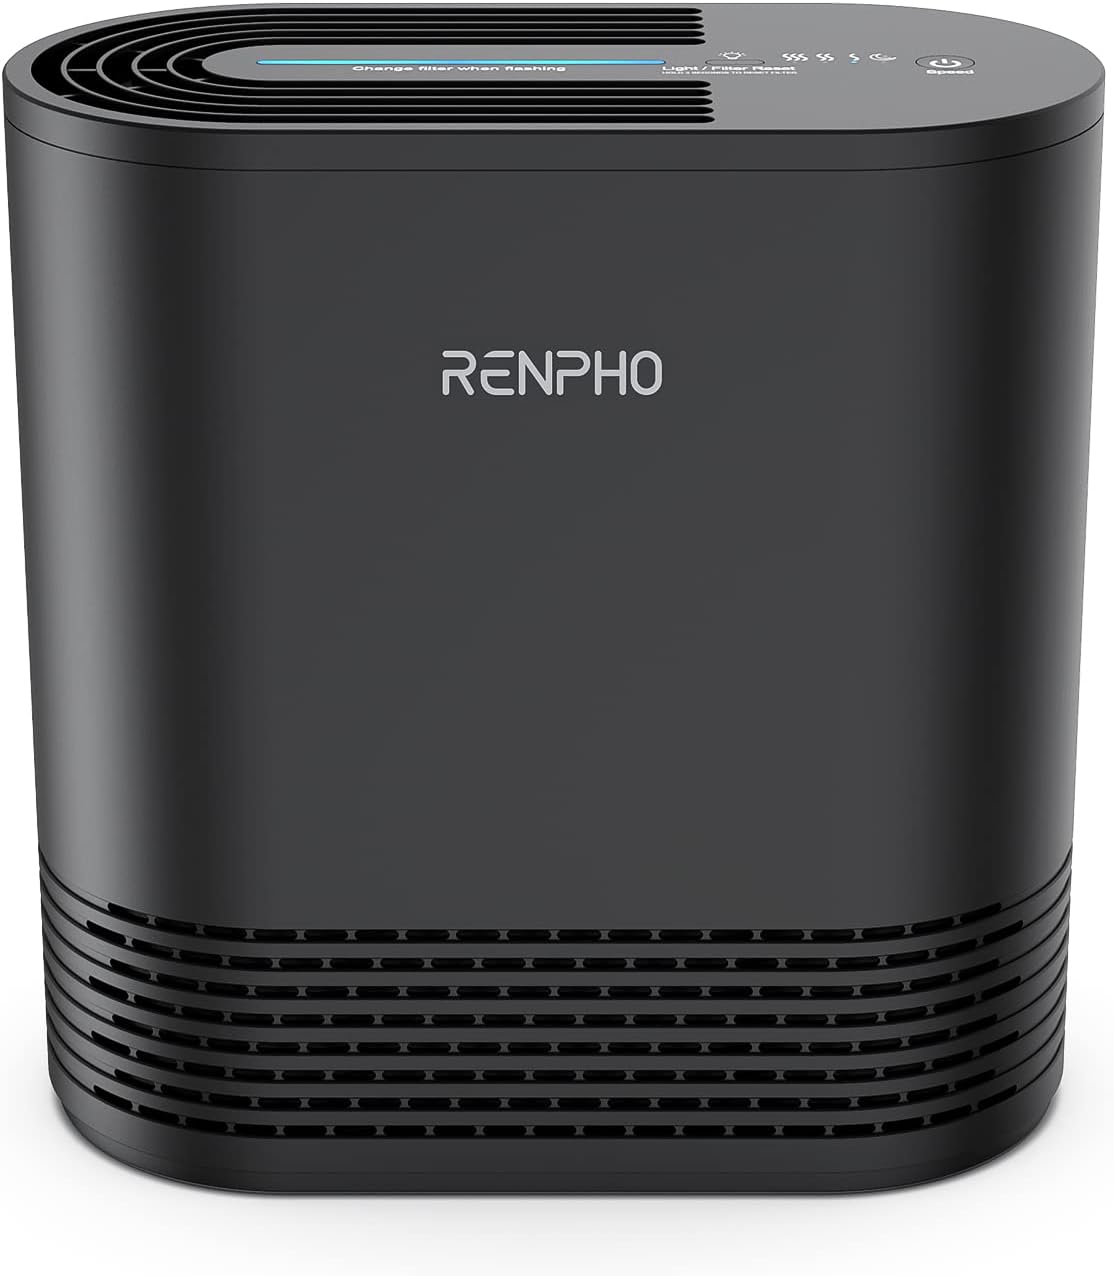 A sleek, modern black Renpho Compact Air Purifier 068 Ozone Free with a rounded top and vented sides features a digital display on the top panel.